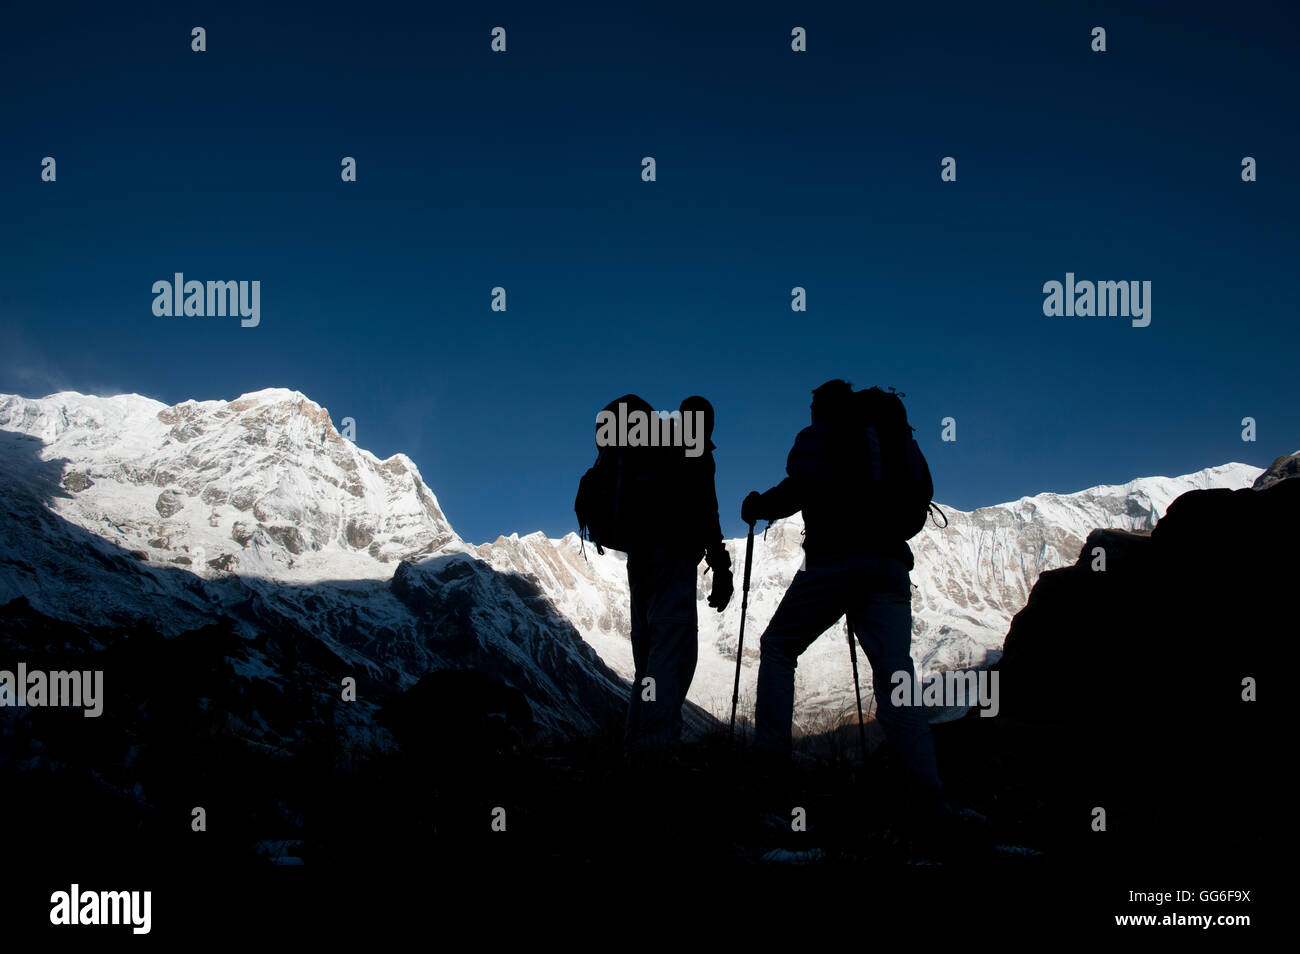 Trekkers on their way down from Annapurna base camp with views of Annapurna 1 in the distance, Himalayas, Nepal, Asia Stock Photo